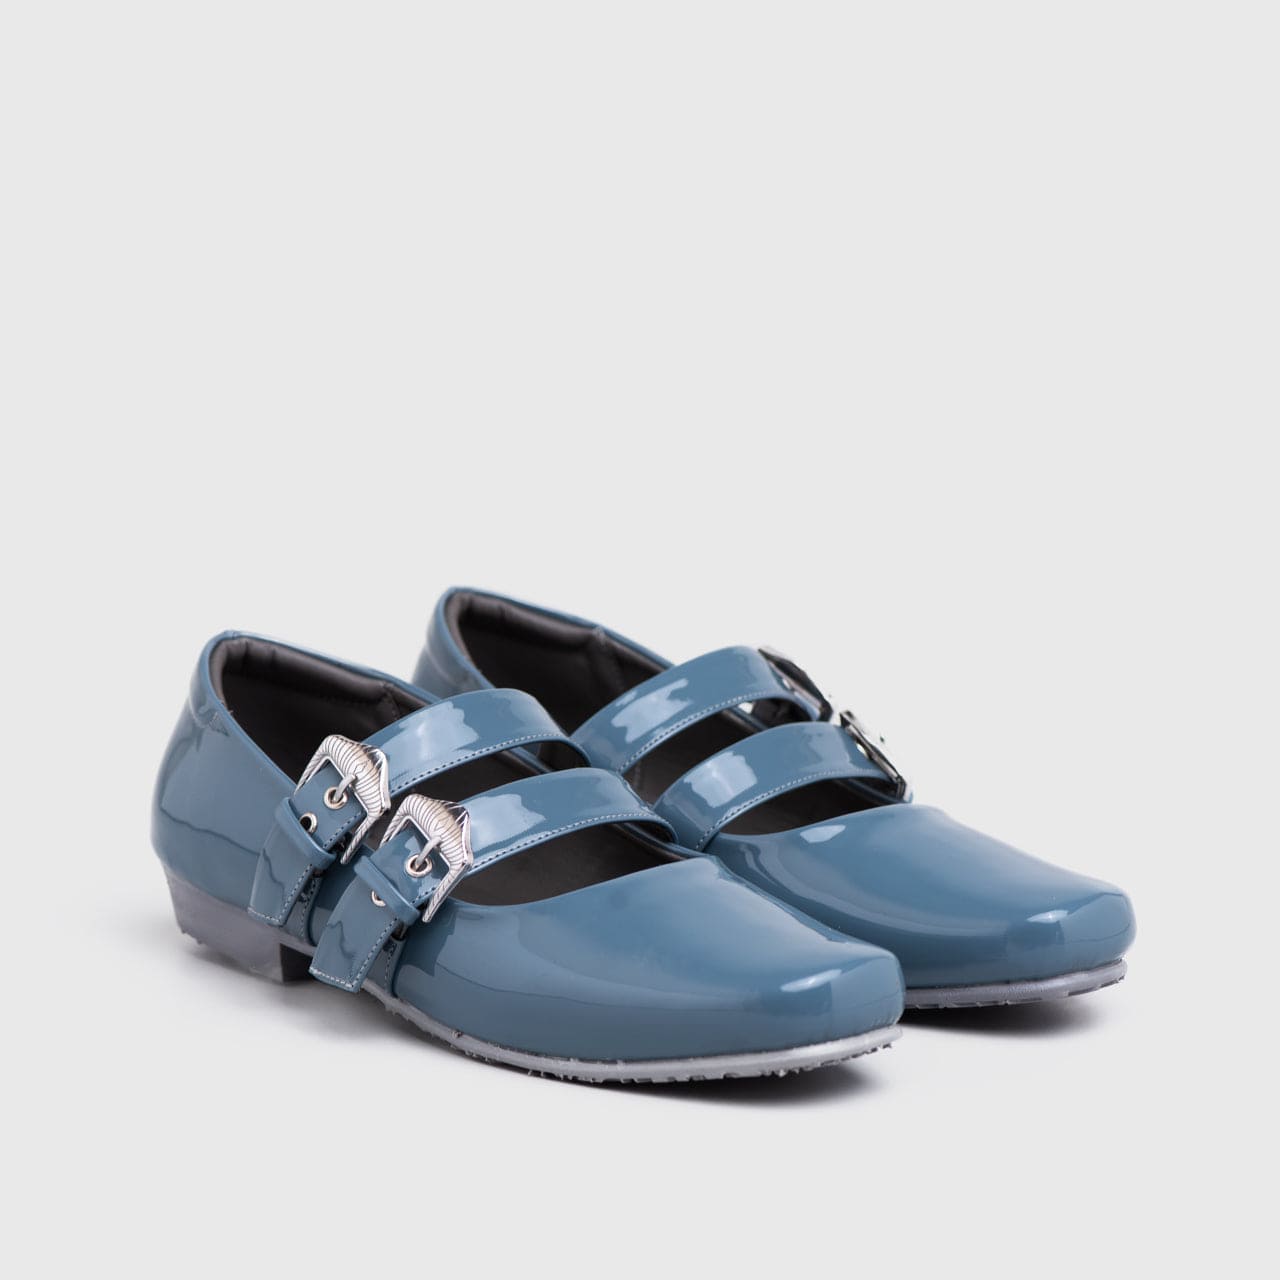 Adorable Projects Official Adorableprojects - Baleva Flat Shoes Blue Mirage